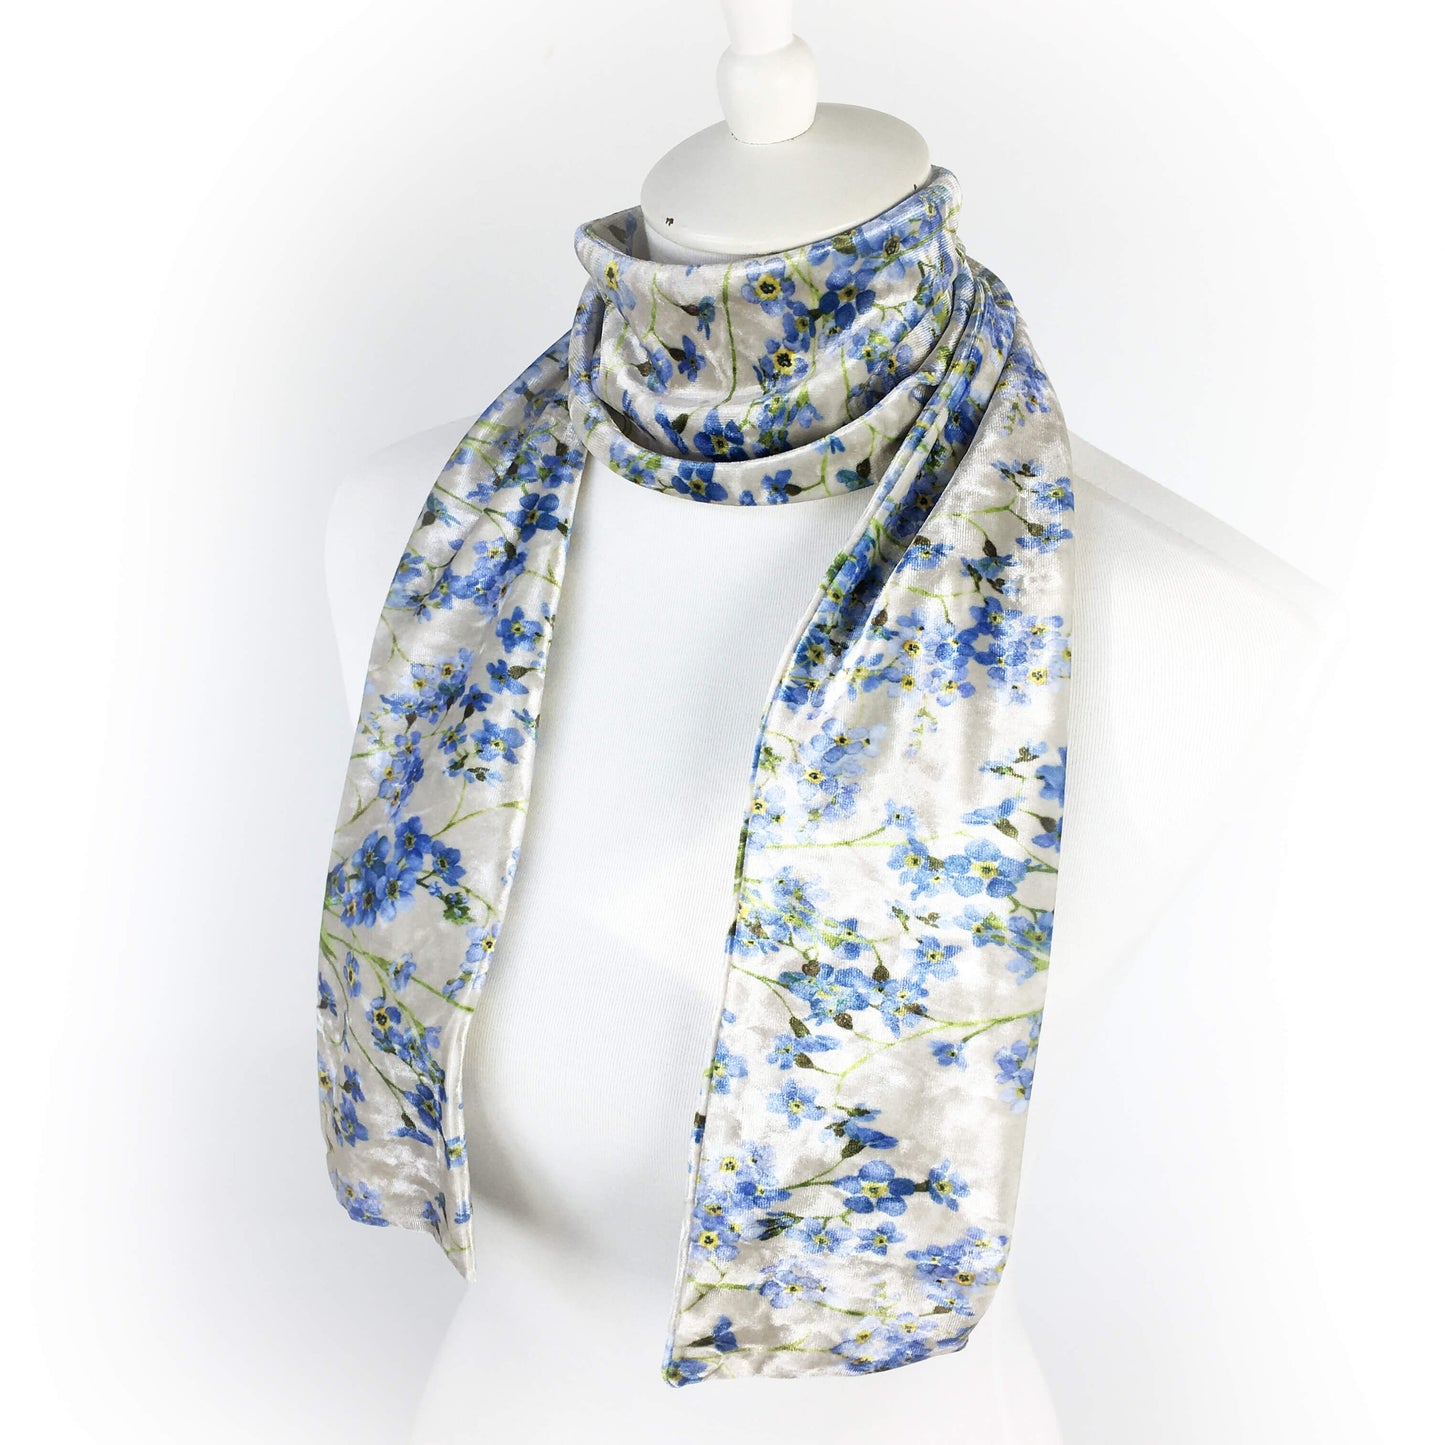 Forget-Me-Nots Velour Scarf, Womans Scarf, All season, Luminous Scarf, hand painted scarf, artist scarf, Wear all day or evening